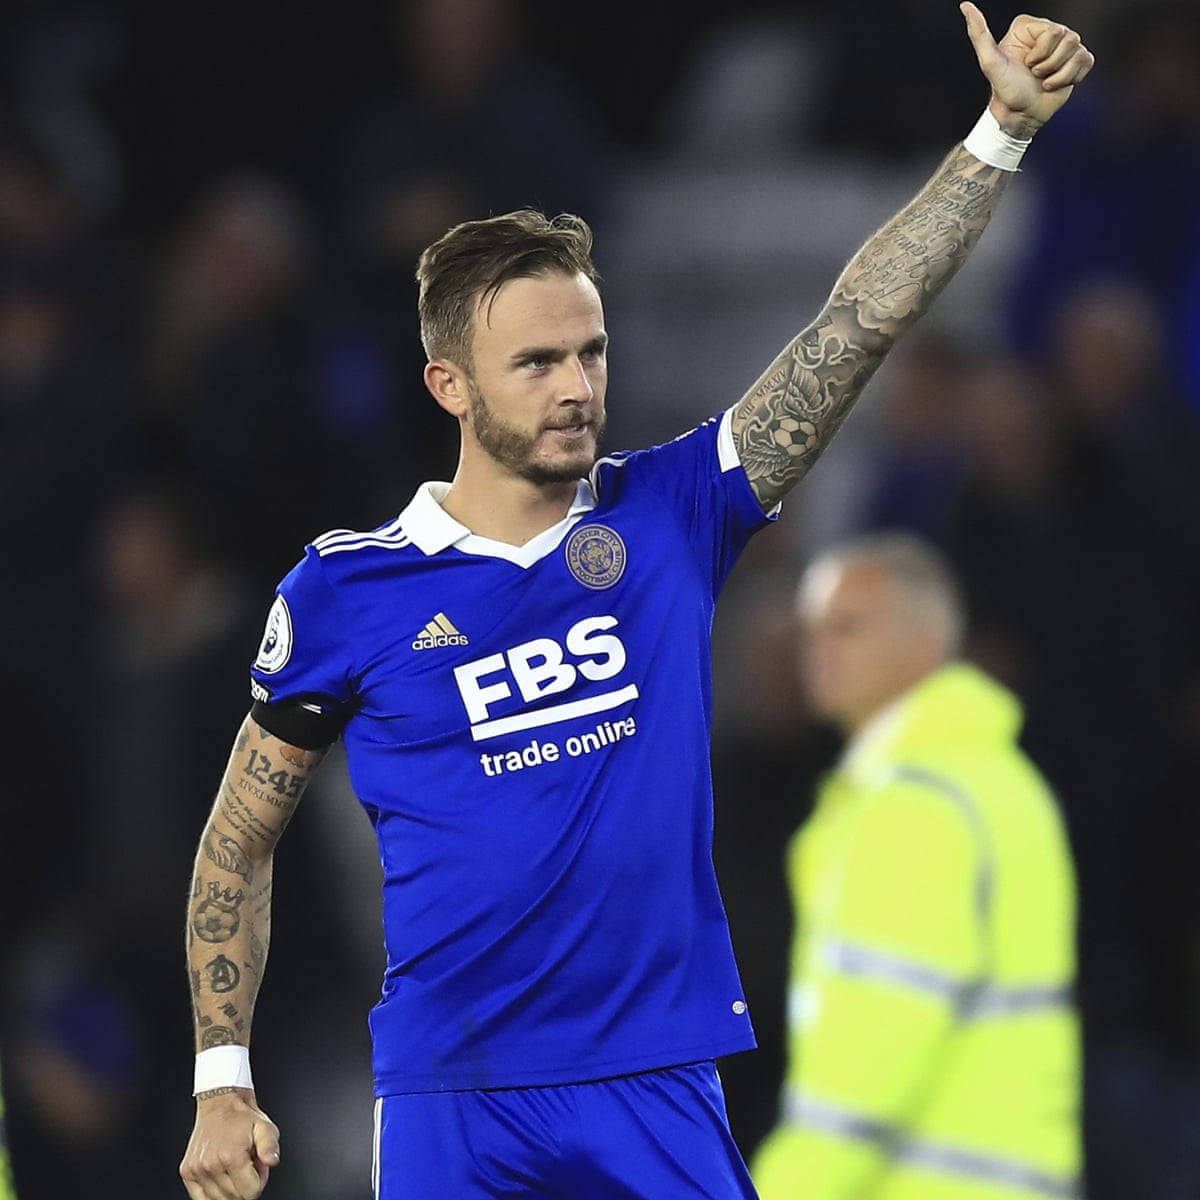 Romano] James Maddison has signed contract as new Tottenham player. Medical  done in the morning as expected. ⚪️✓ #THFC Here we go confirmed — just  waiting for club statement to announce £40m